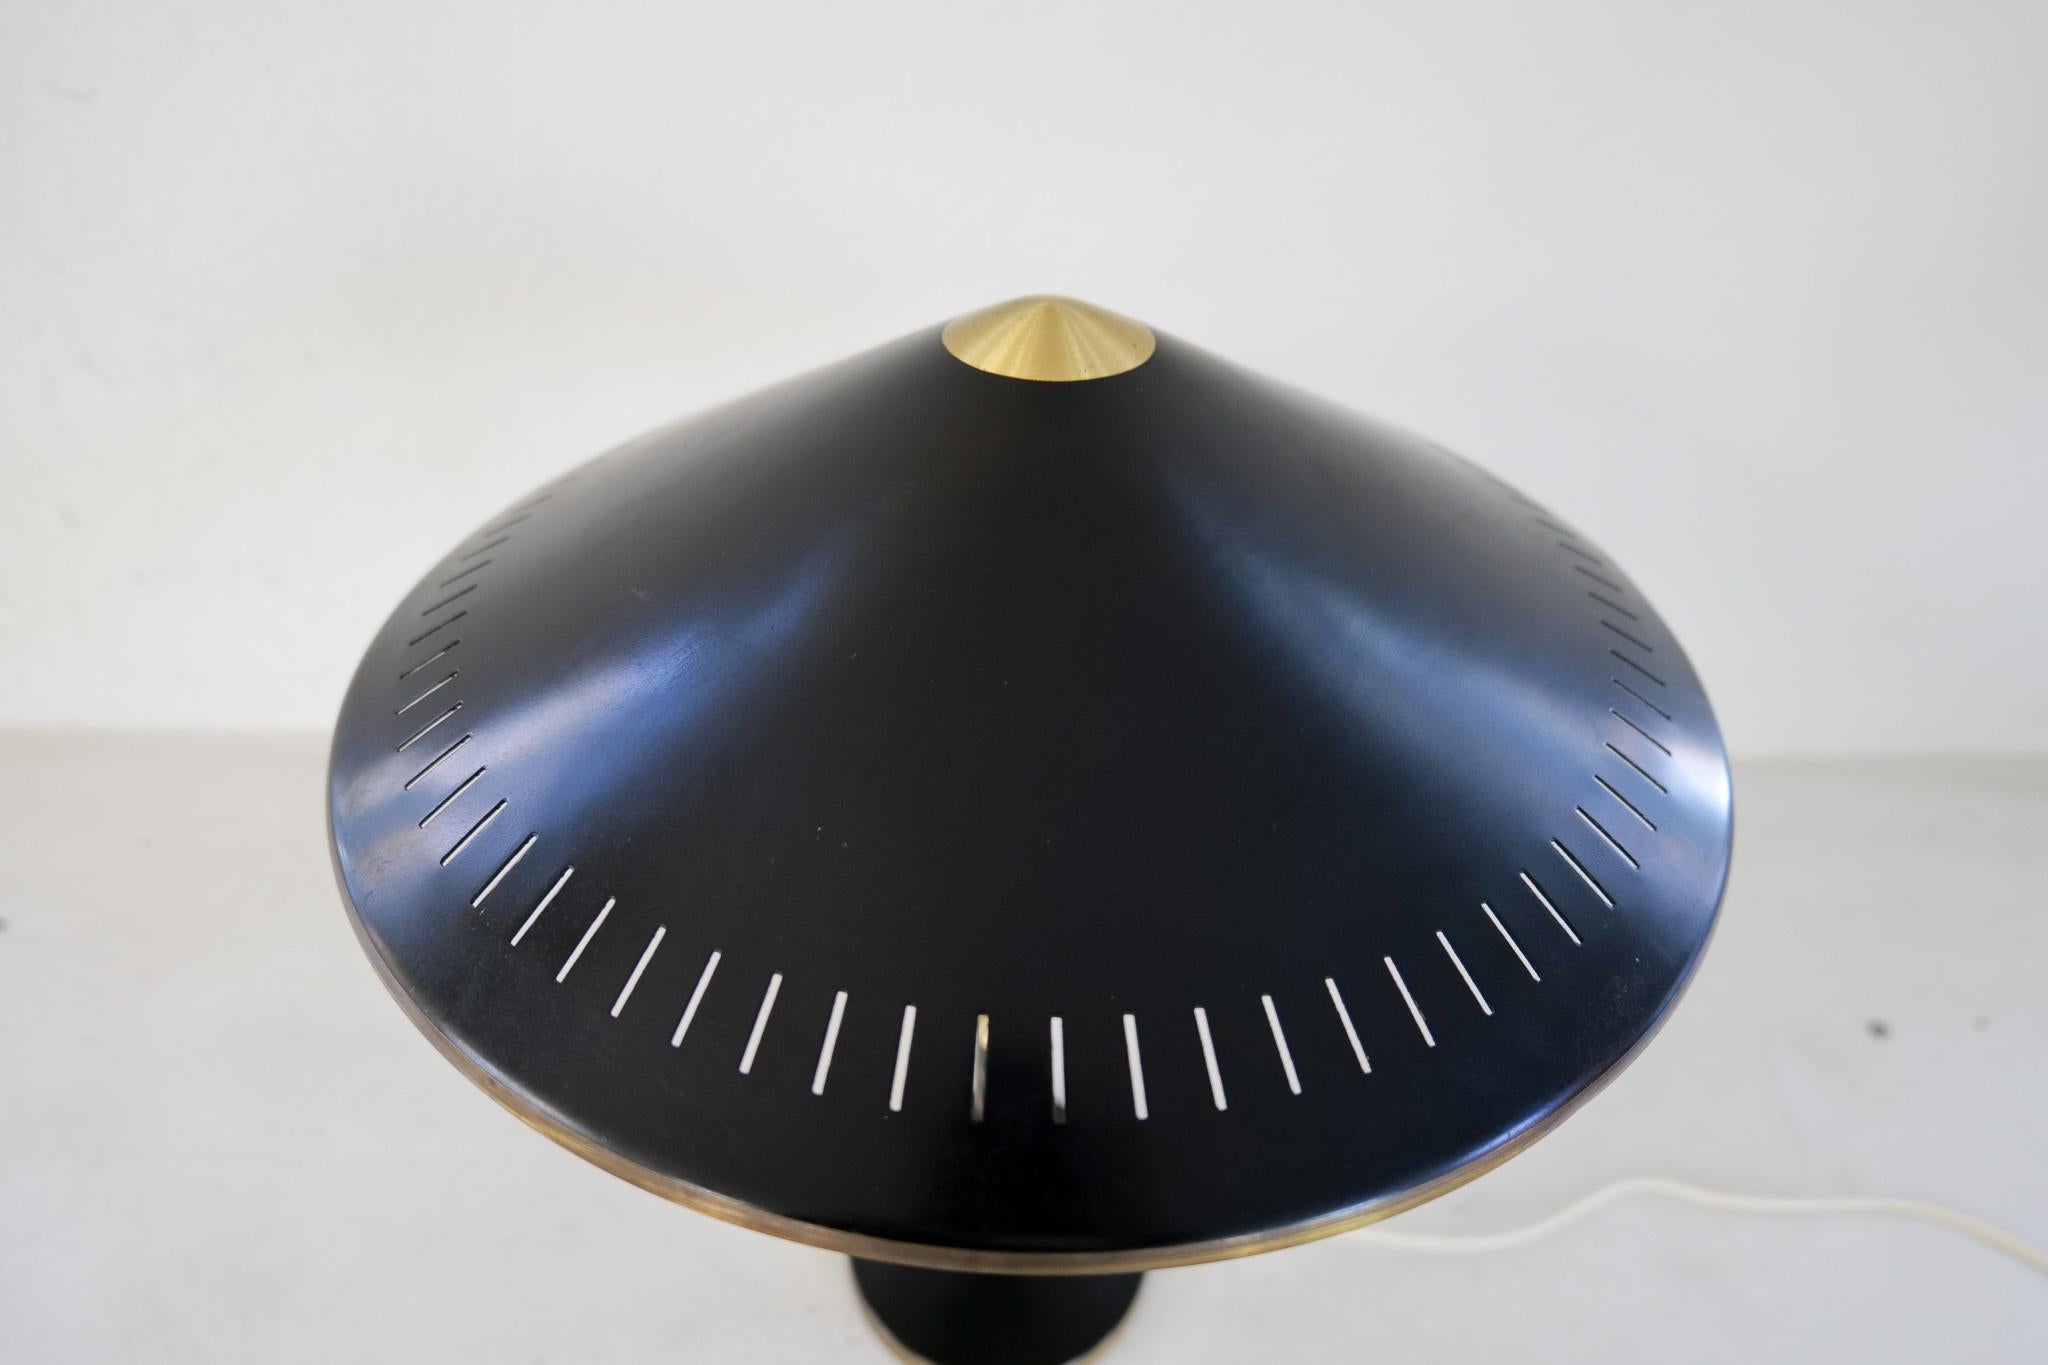 Metal Midcentury Modern Table Lamp by Bent Karlby Produced by Lyfa in Denmark, 1956 For Sale